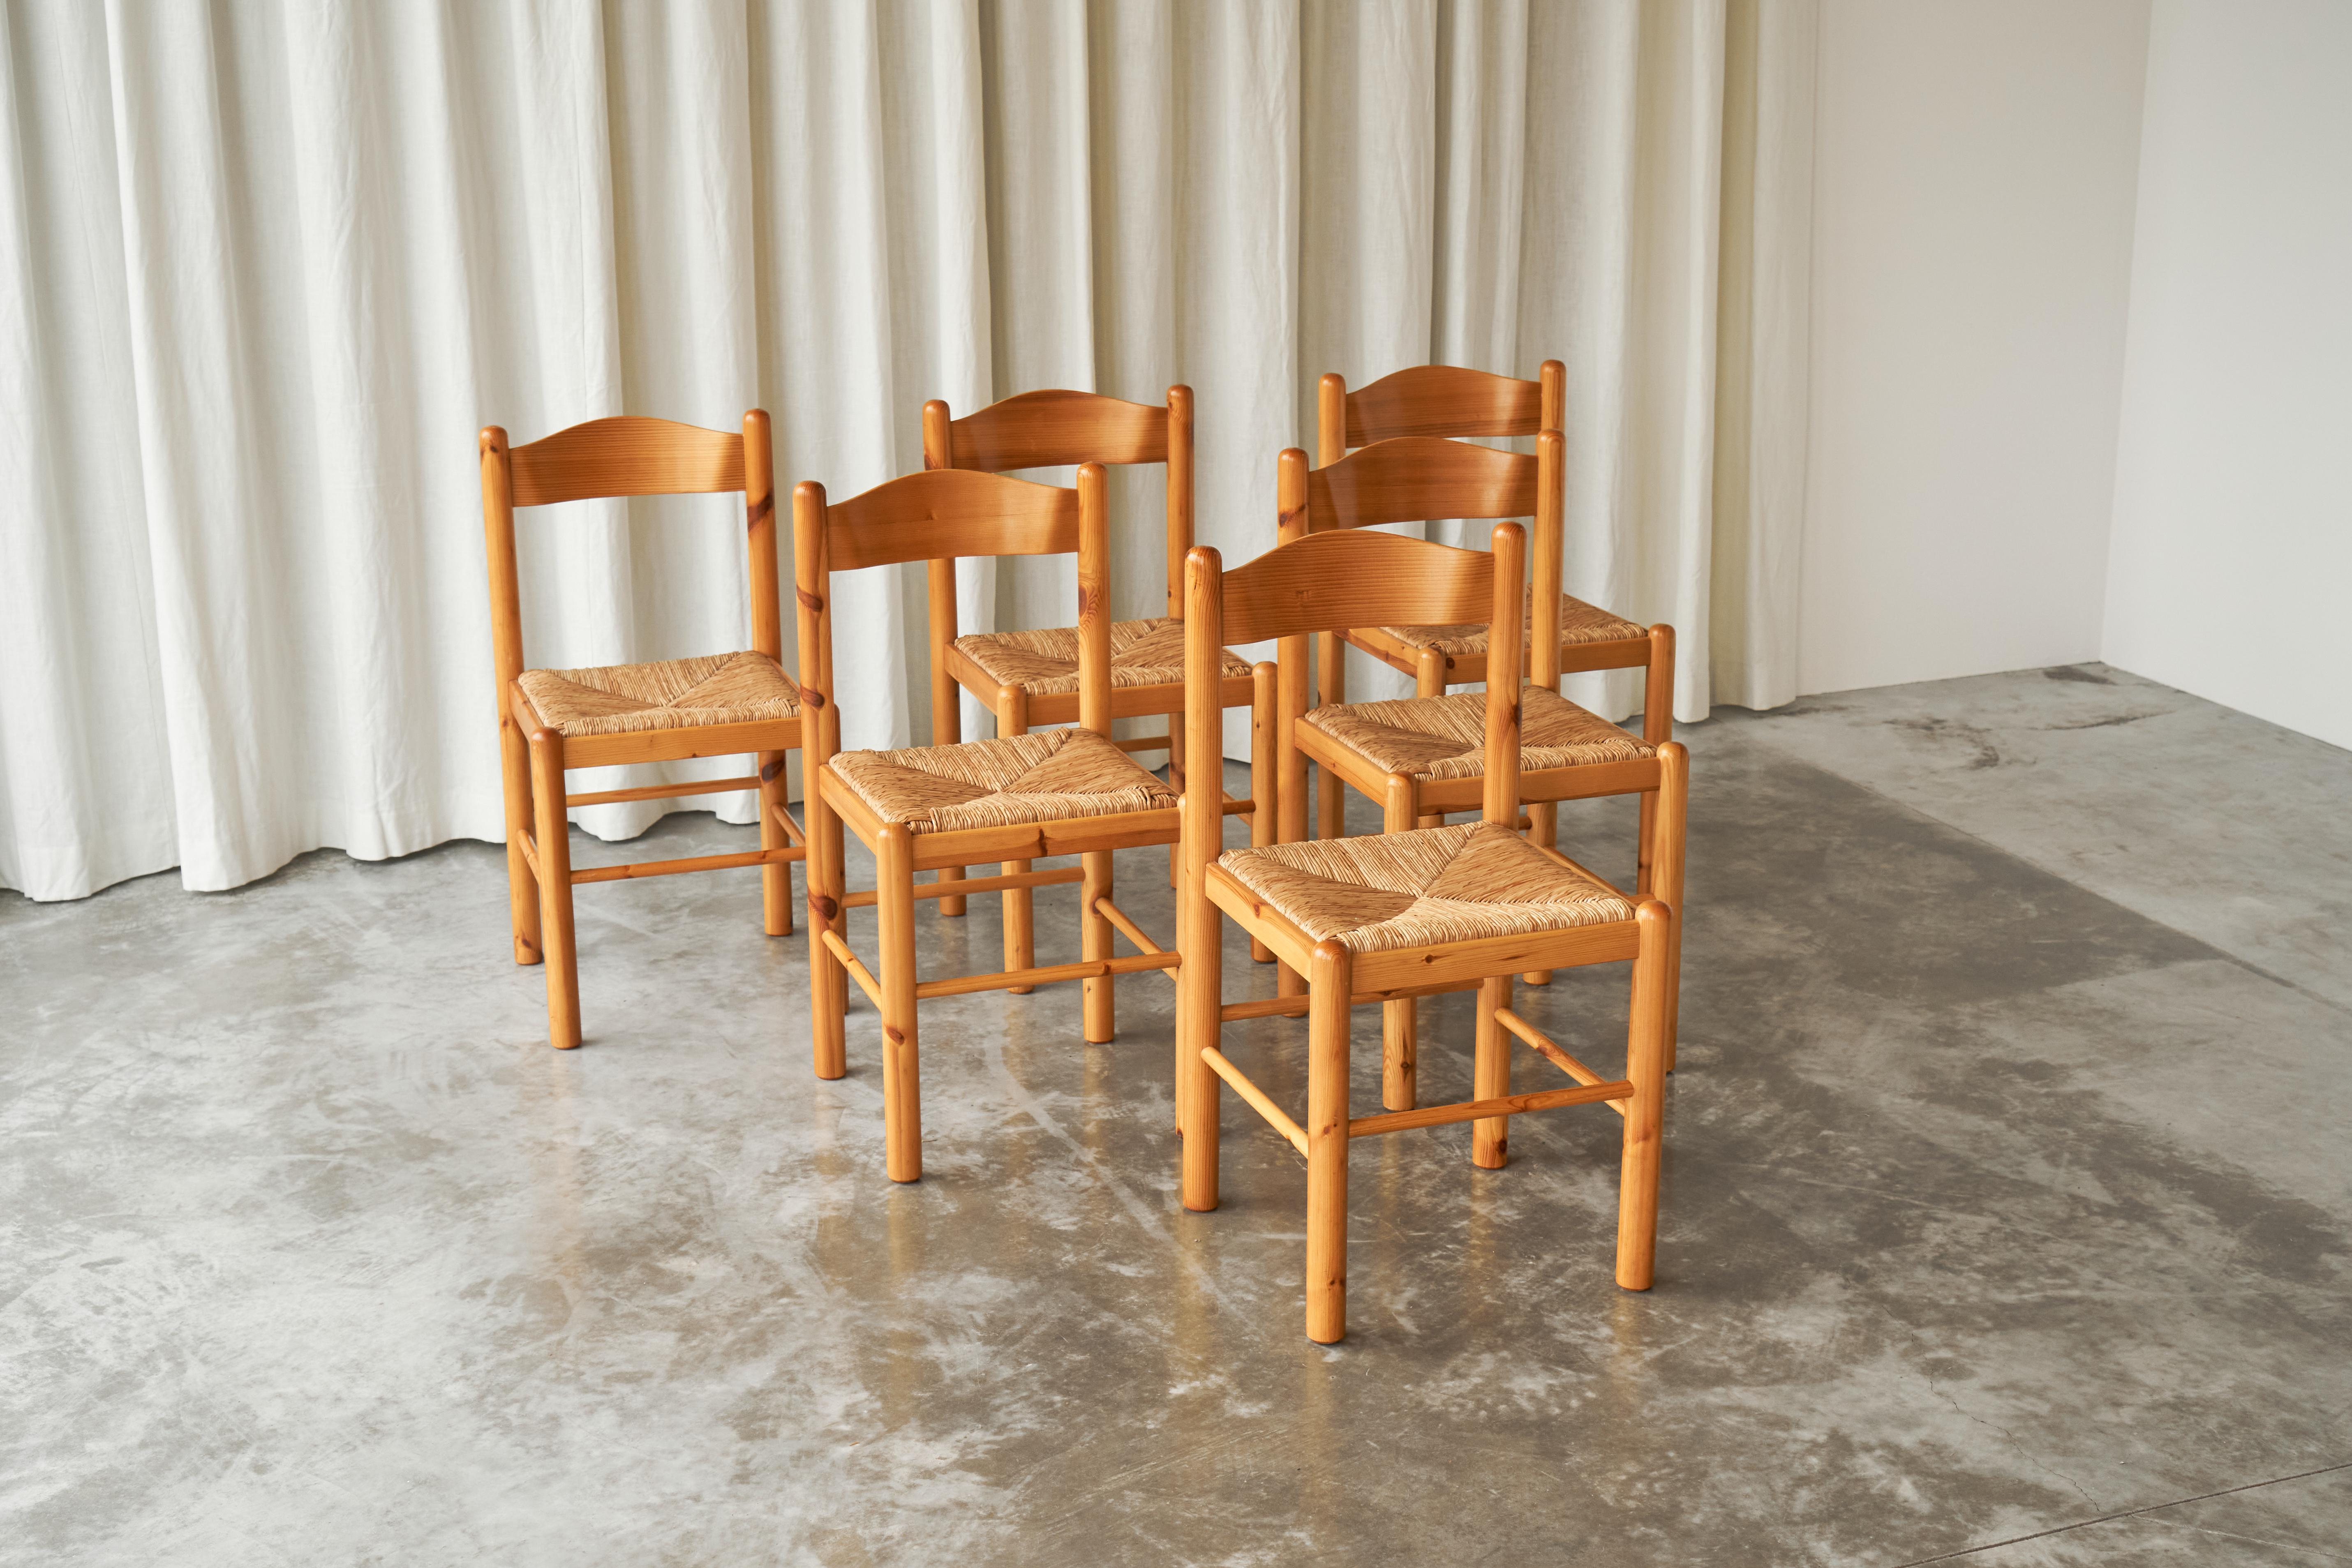 European Set of 6 Rustic Chalet Chic Chairs in Pine and Rush 1960s For Sale